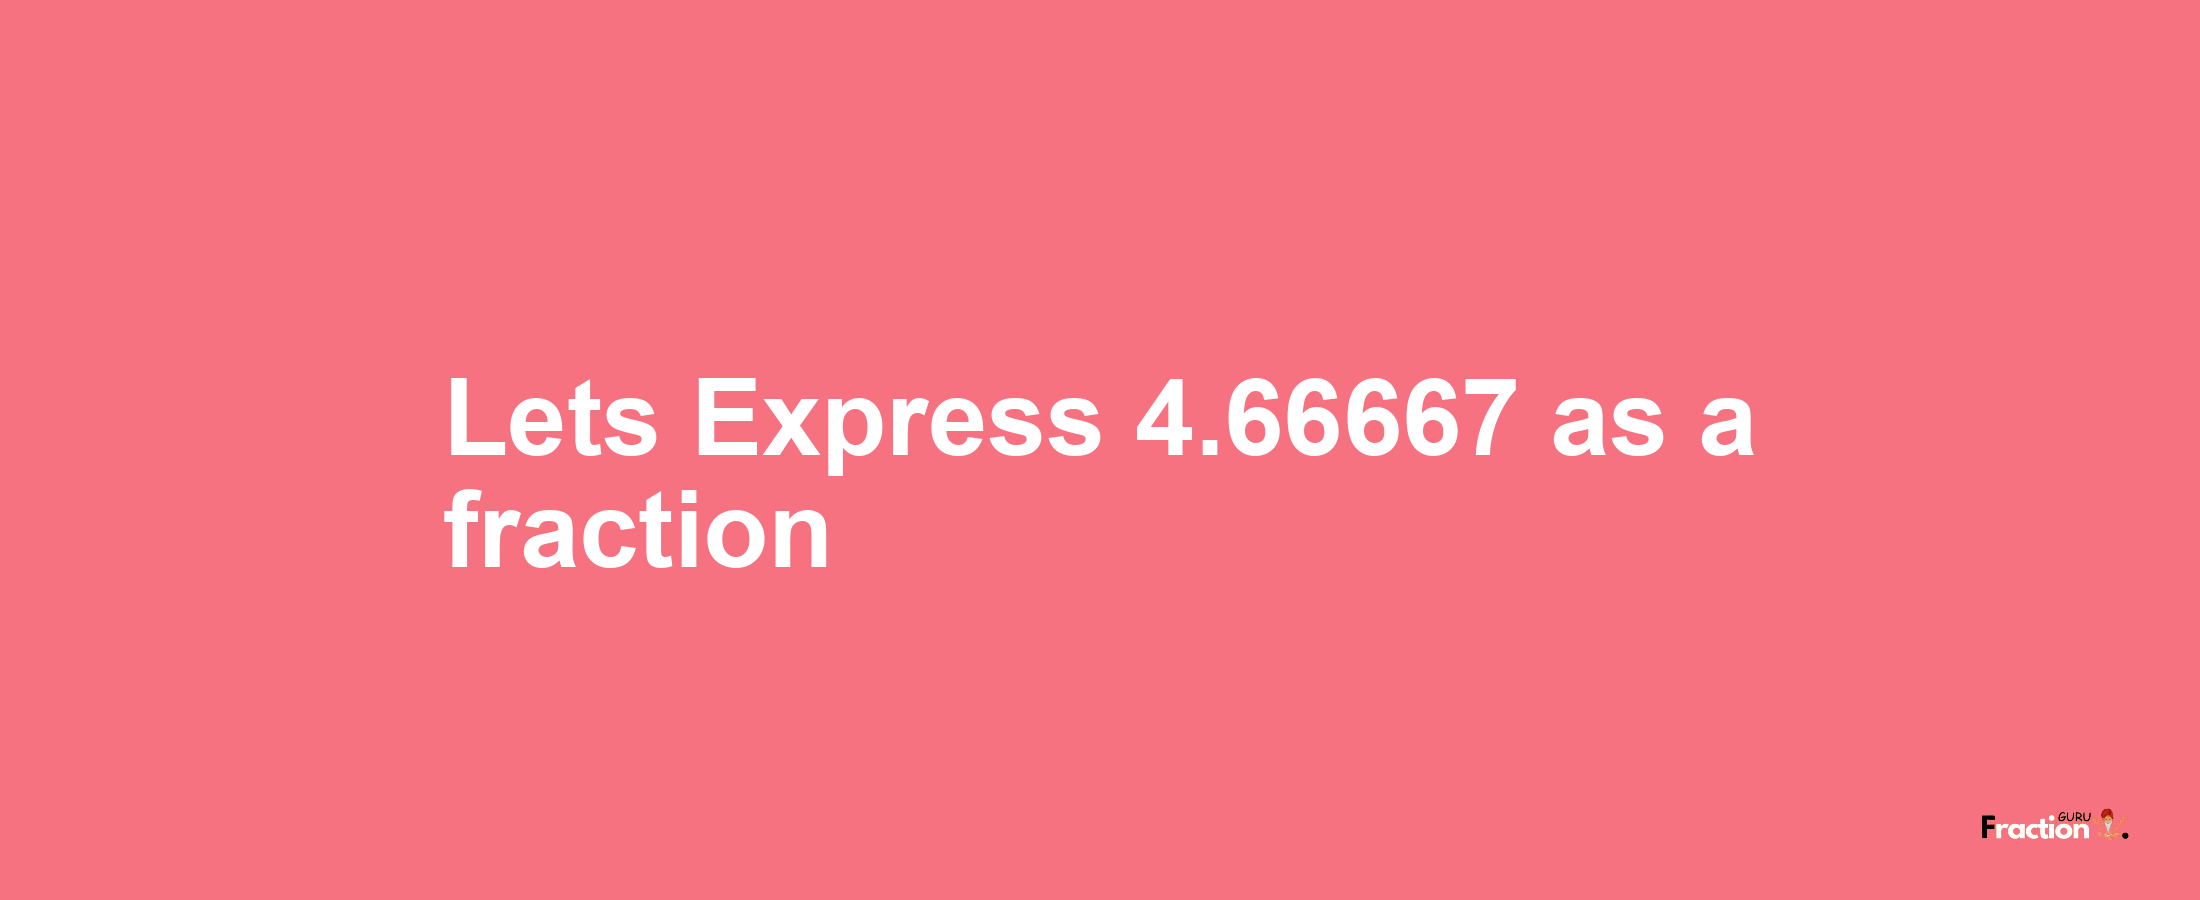 Lets Express 4.66667 as afraction